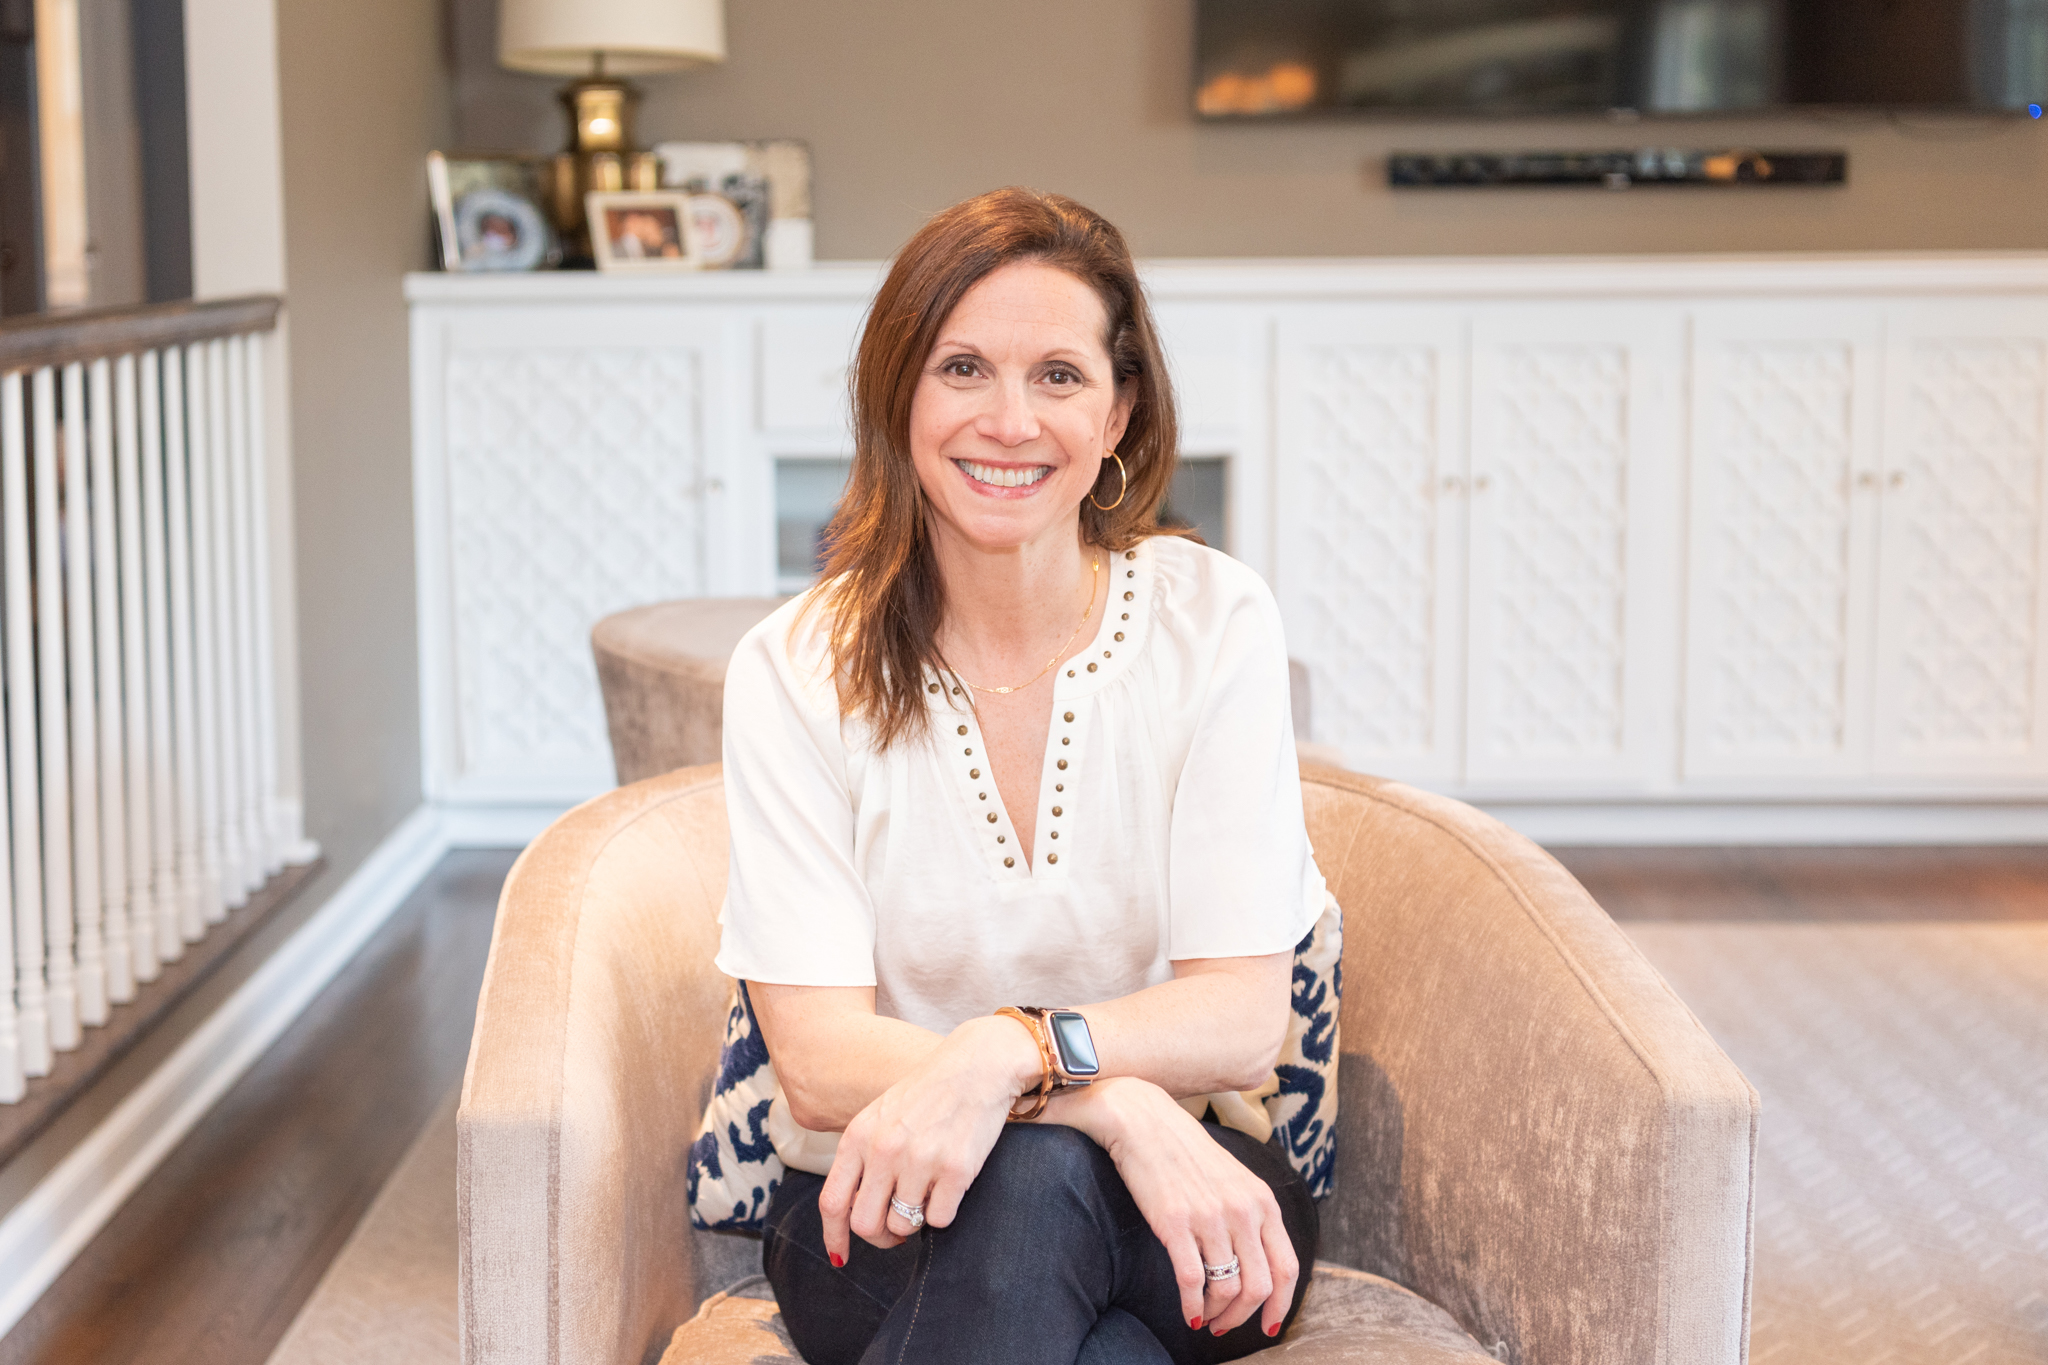 A female leadership coach sitting on her couch and smiling for her branding photoshoot.